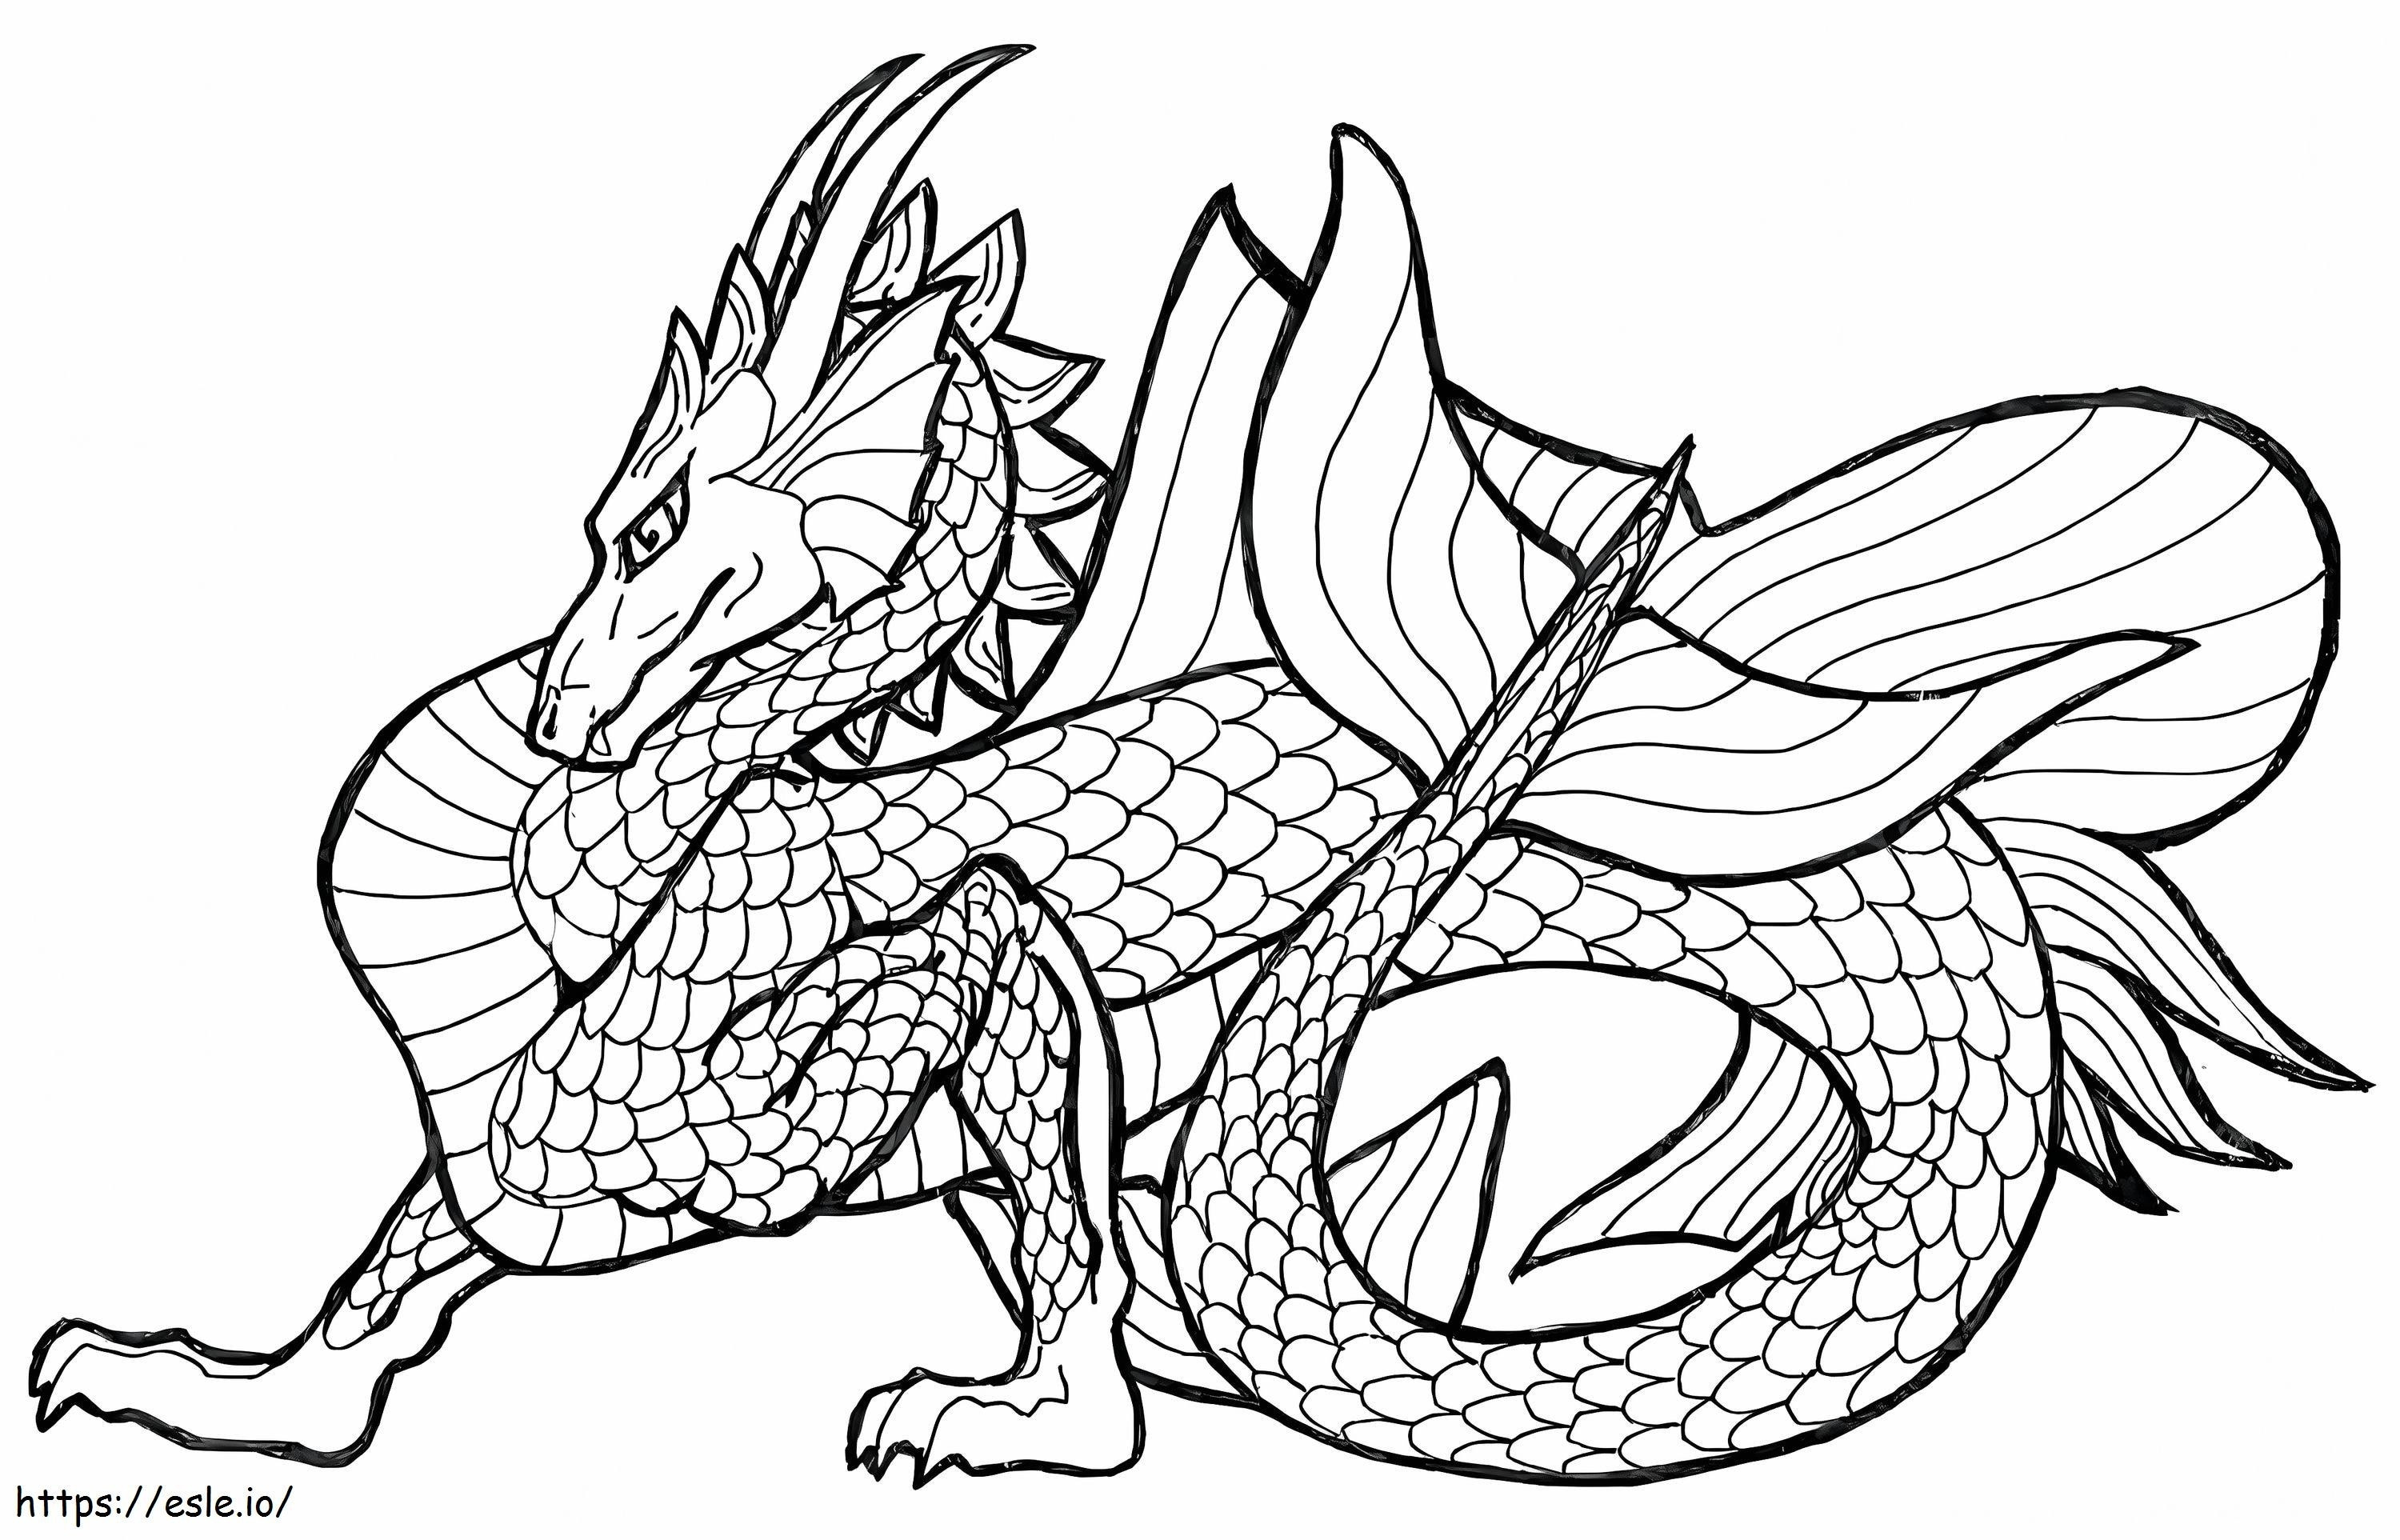 Water Chinese Dragon coloring page